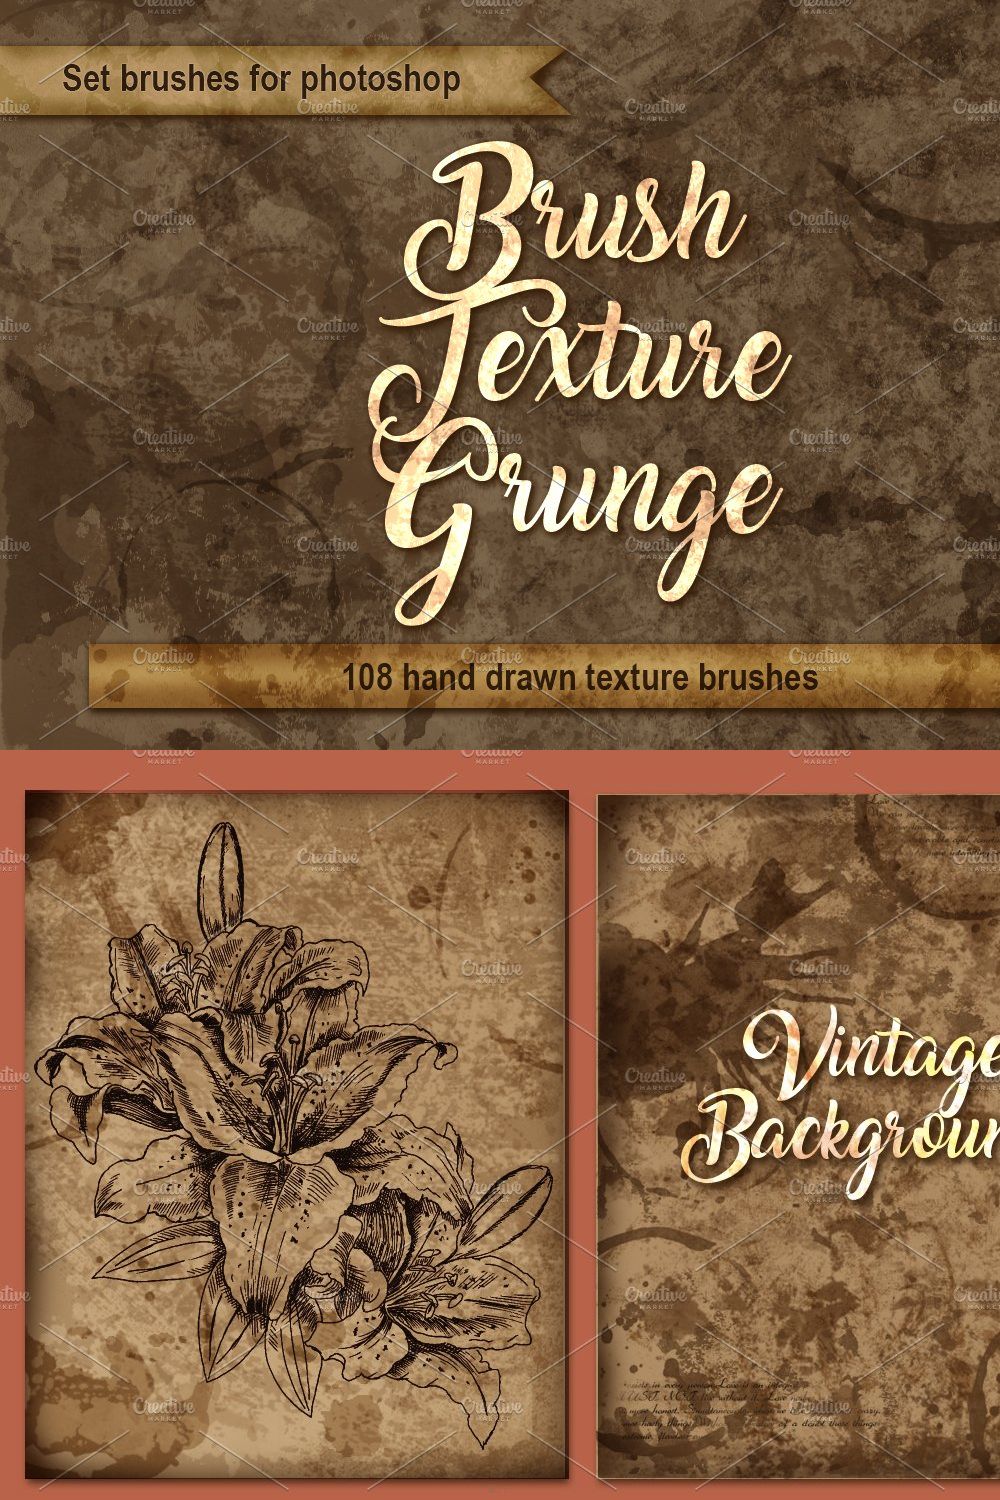 Set brushes grunge for photoshop pinterest preview image.